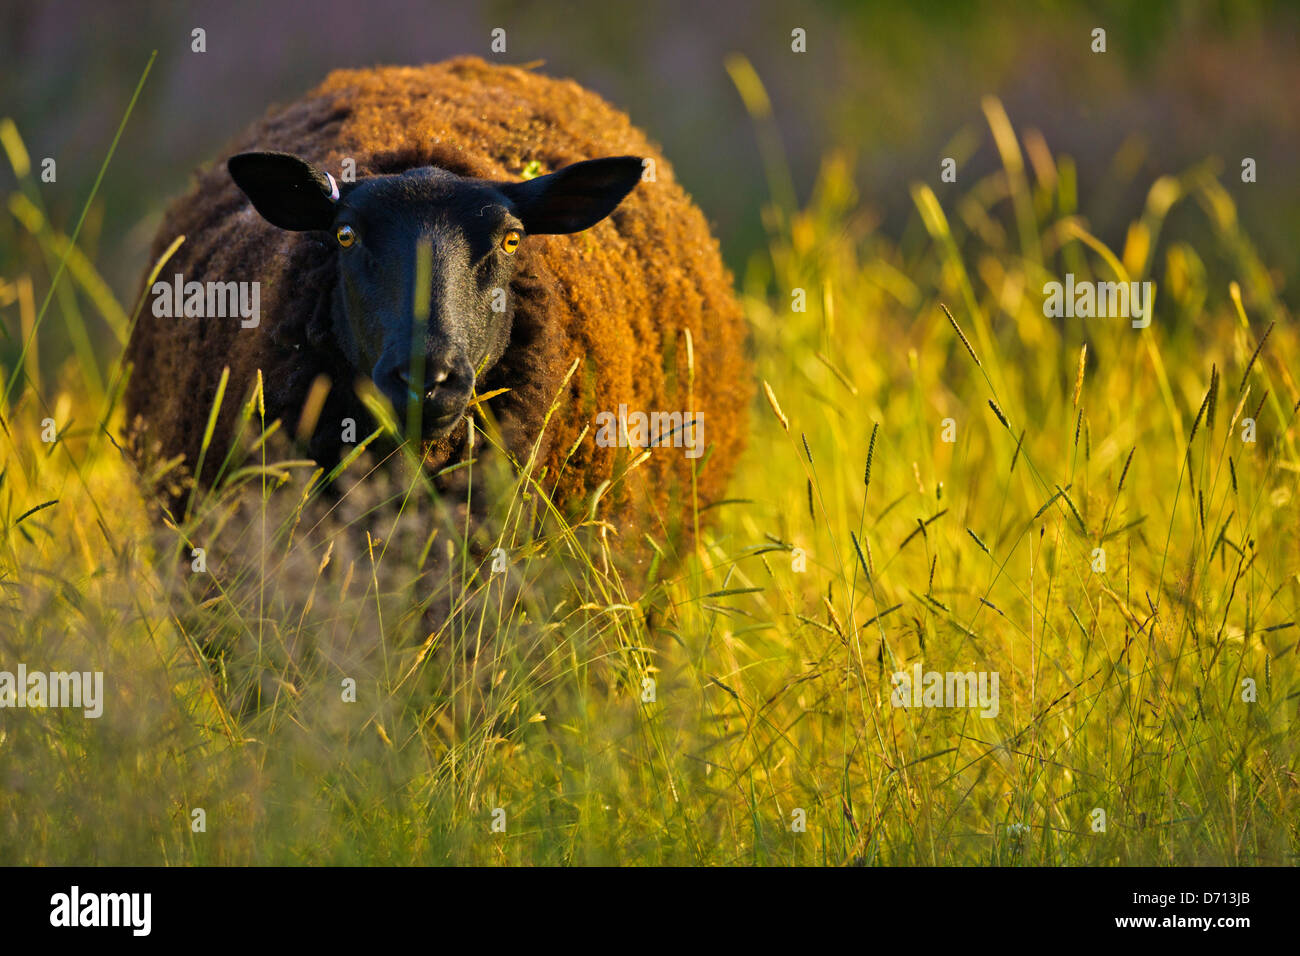 Canada, Vancouver Island, Sheep in pasture Stock Photo